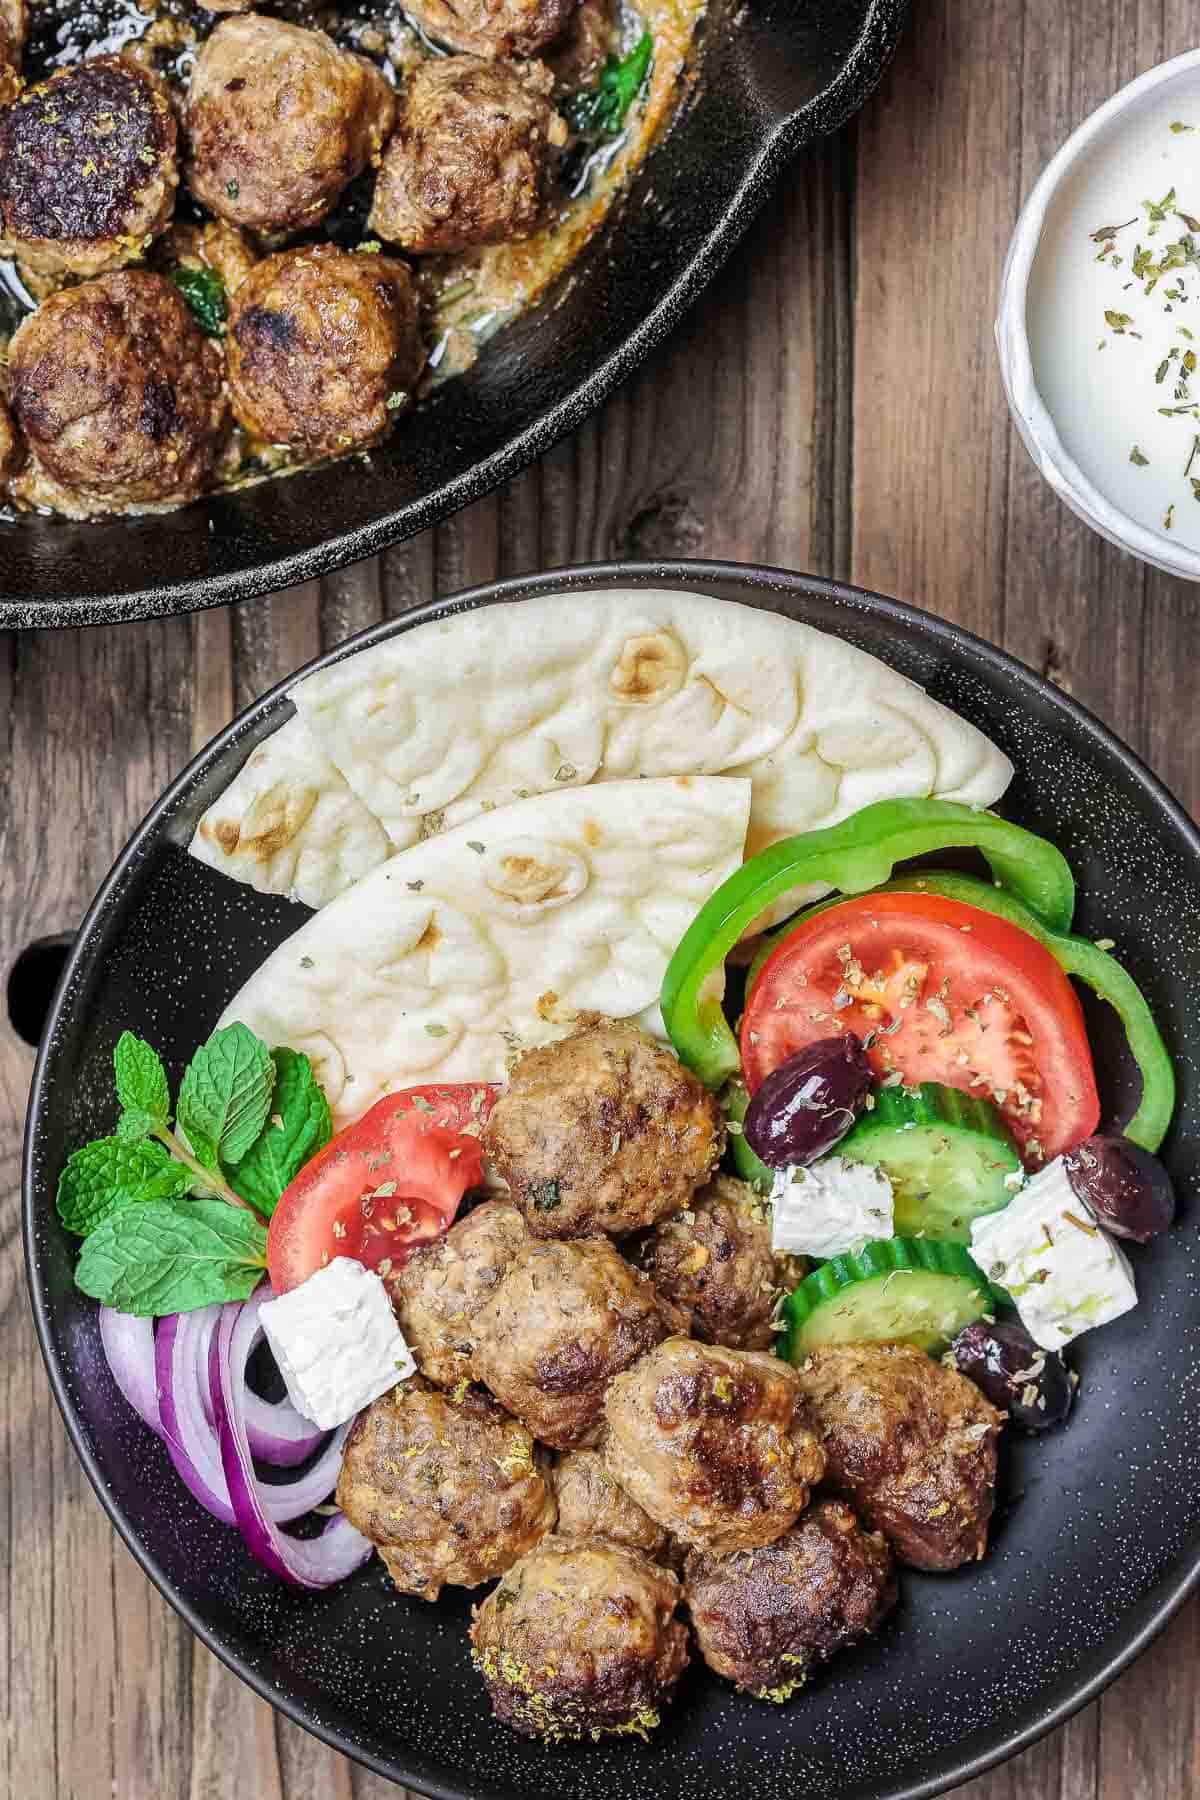 Greek meatballs (keftedes) in a bowl with mint, red onions, pita bread, olives, feta cheese, cucumber, tomato, and green bell peppers.